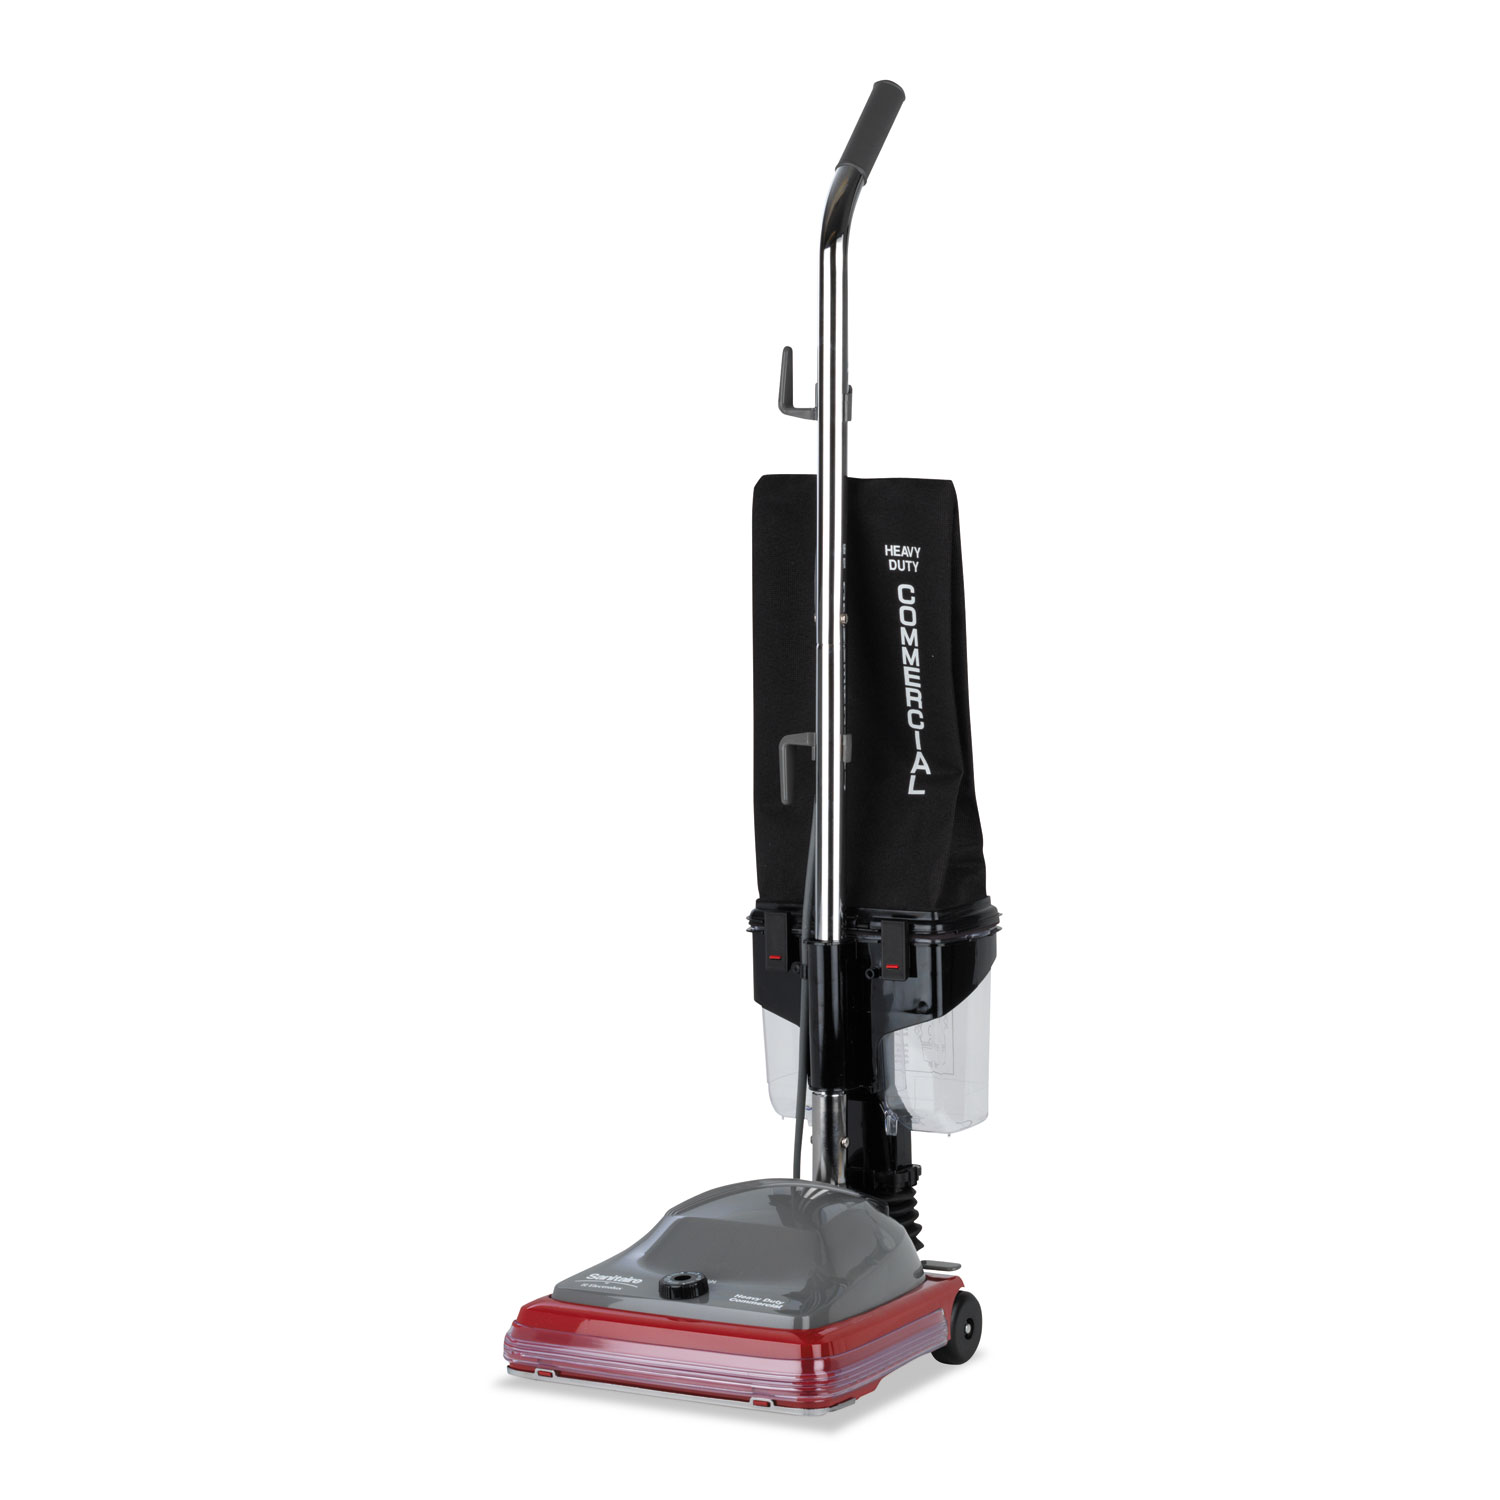 5 Recommendations for Industrial Vacuum Cleaner